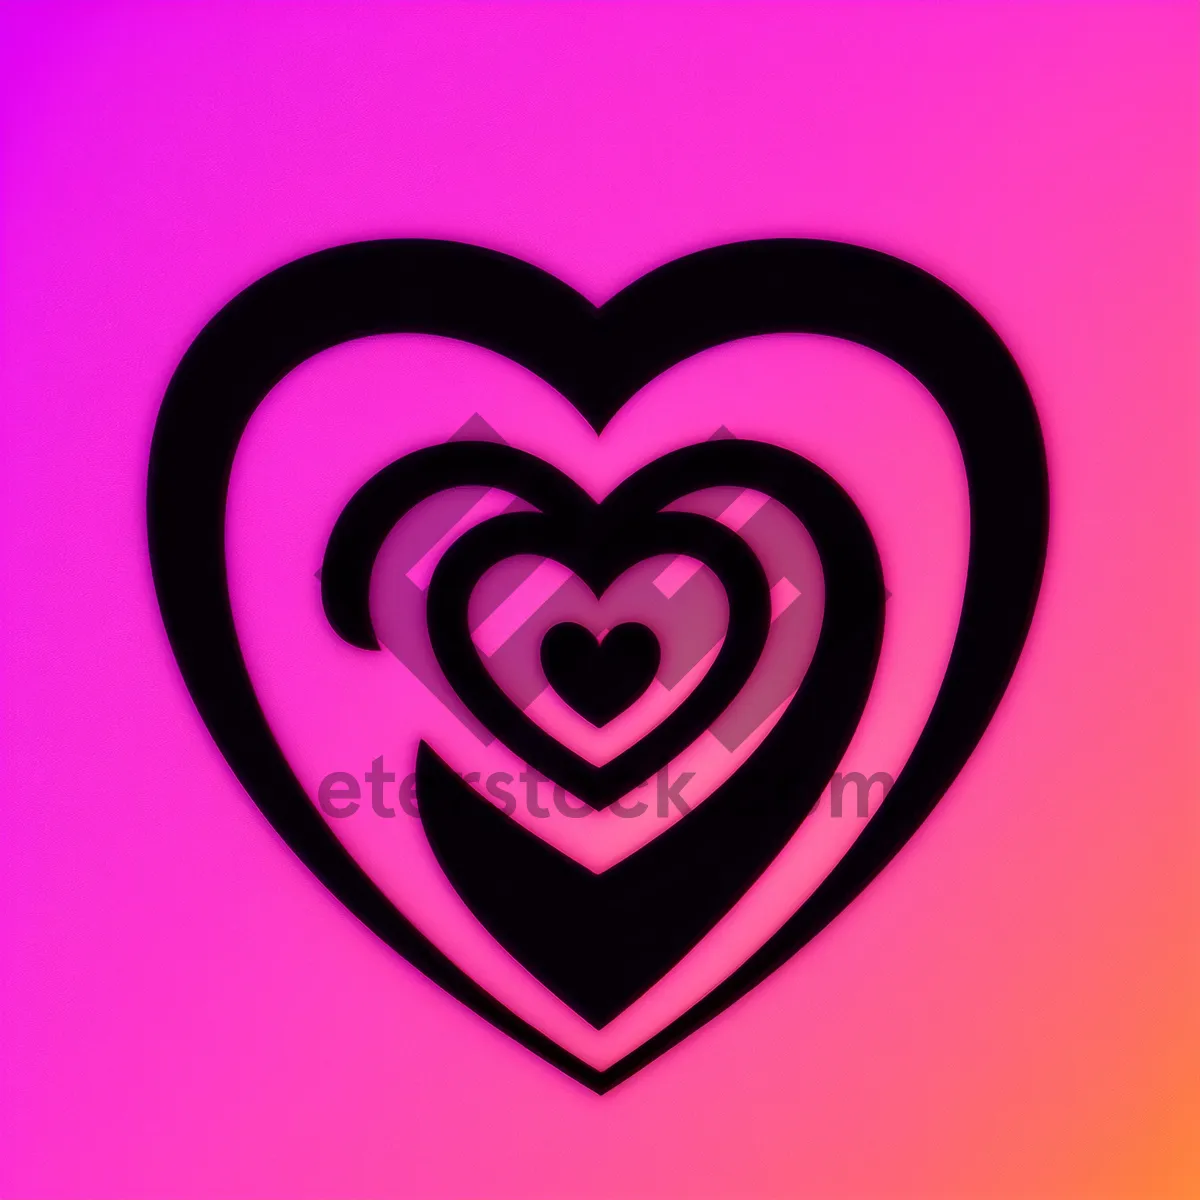 Picture of Colorful Hippie Heart - Love Symbol Art